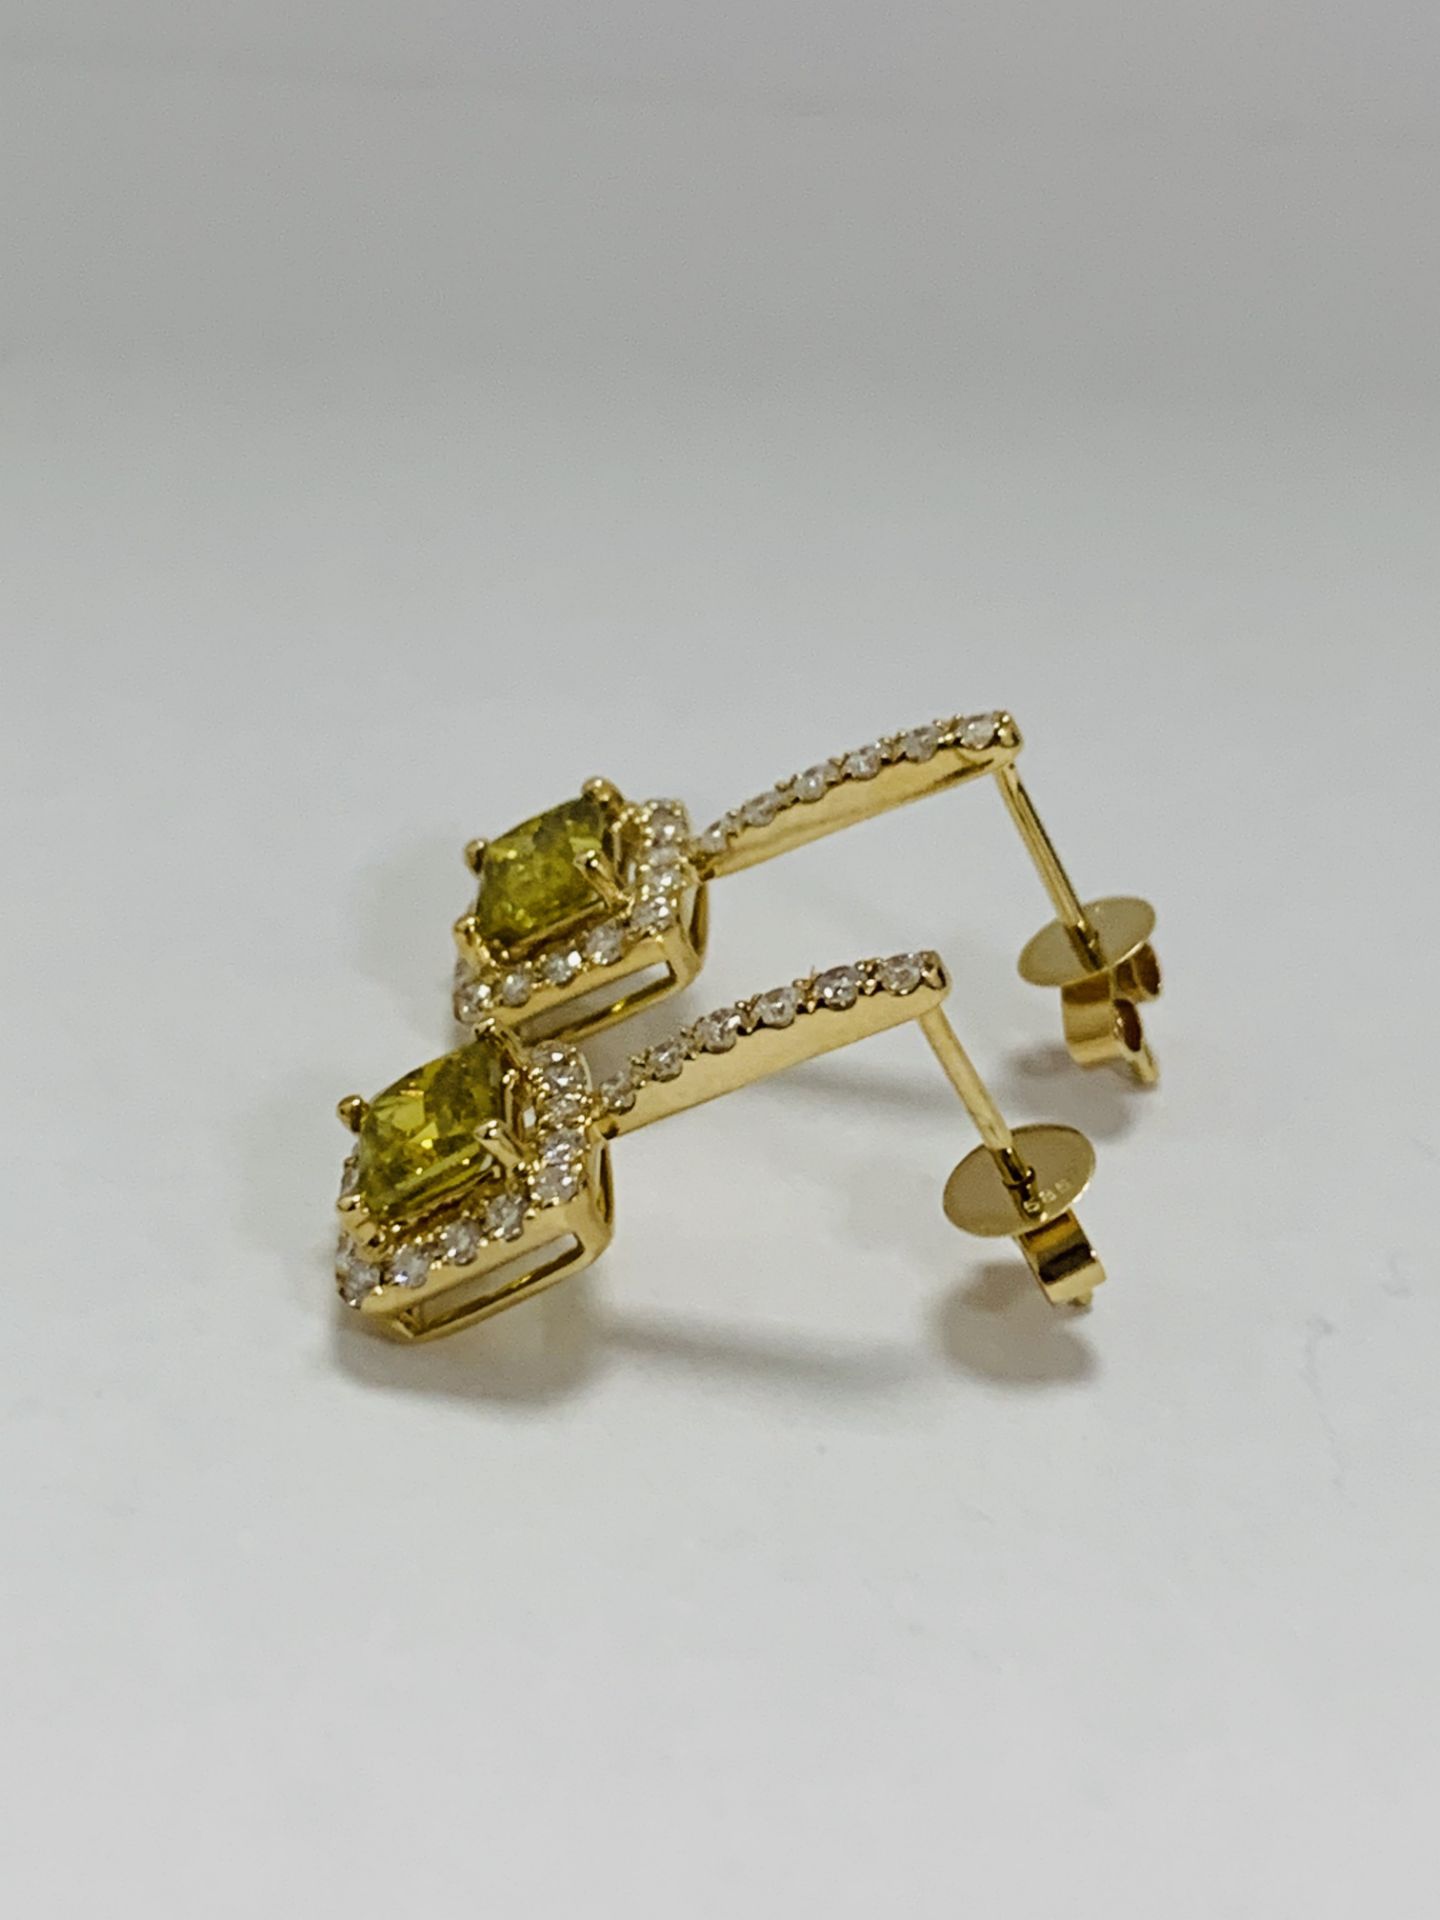 14K Yellow Gold Pair Of Earrings - Image 3 of 9